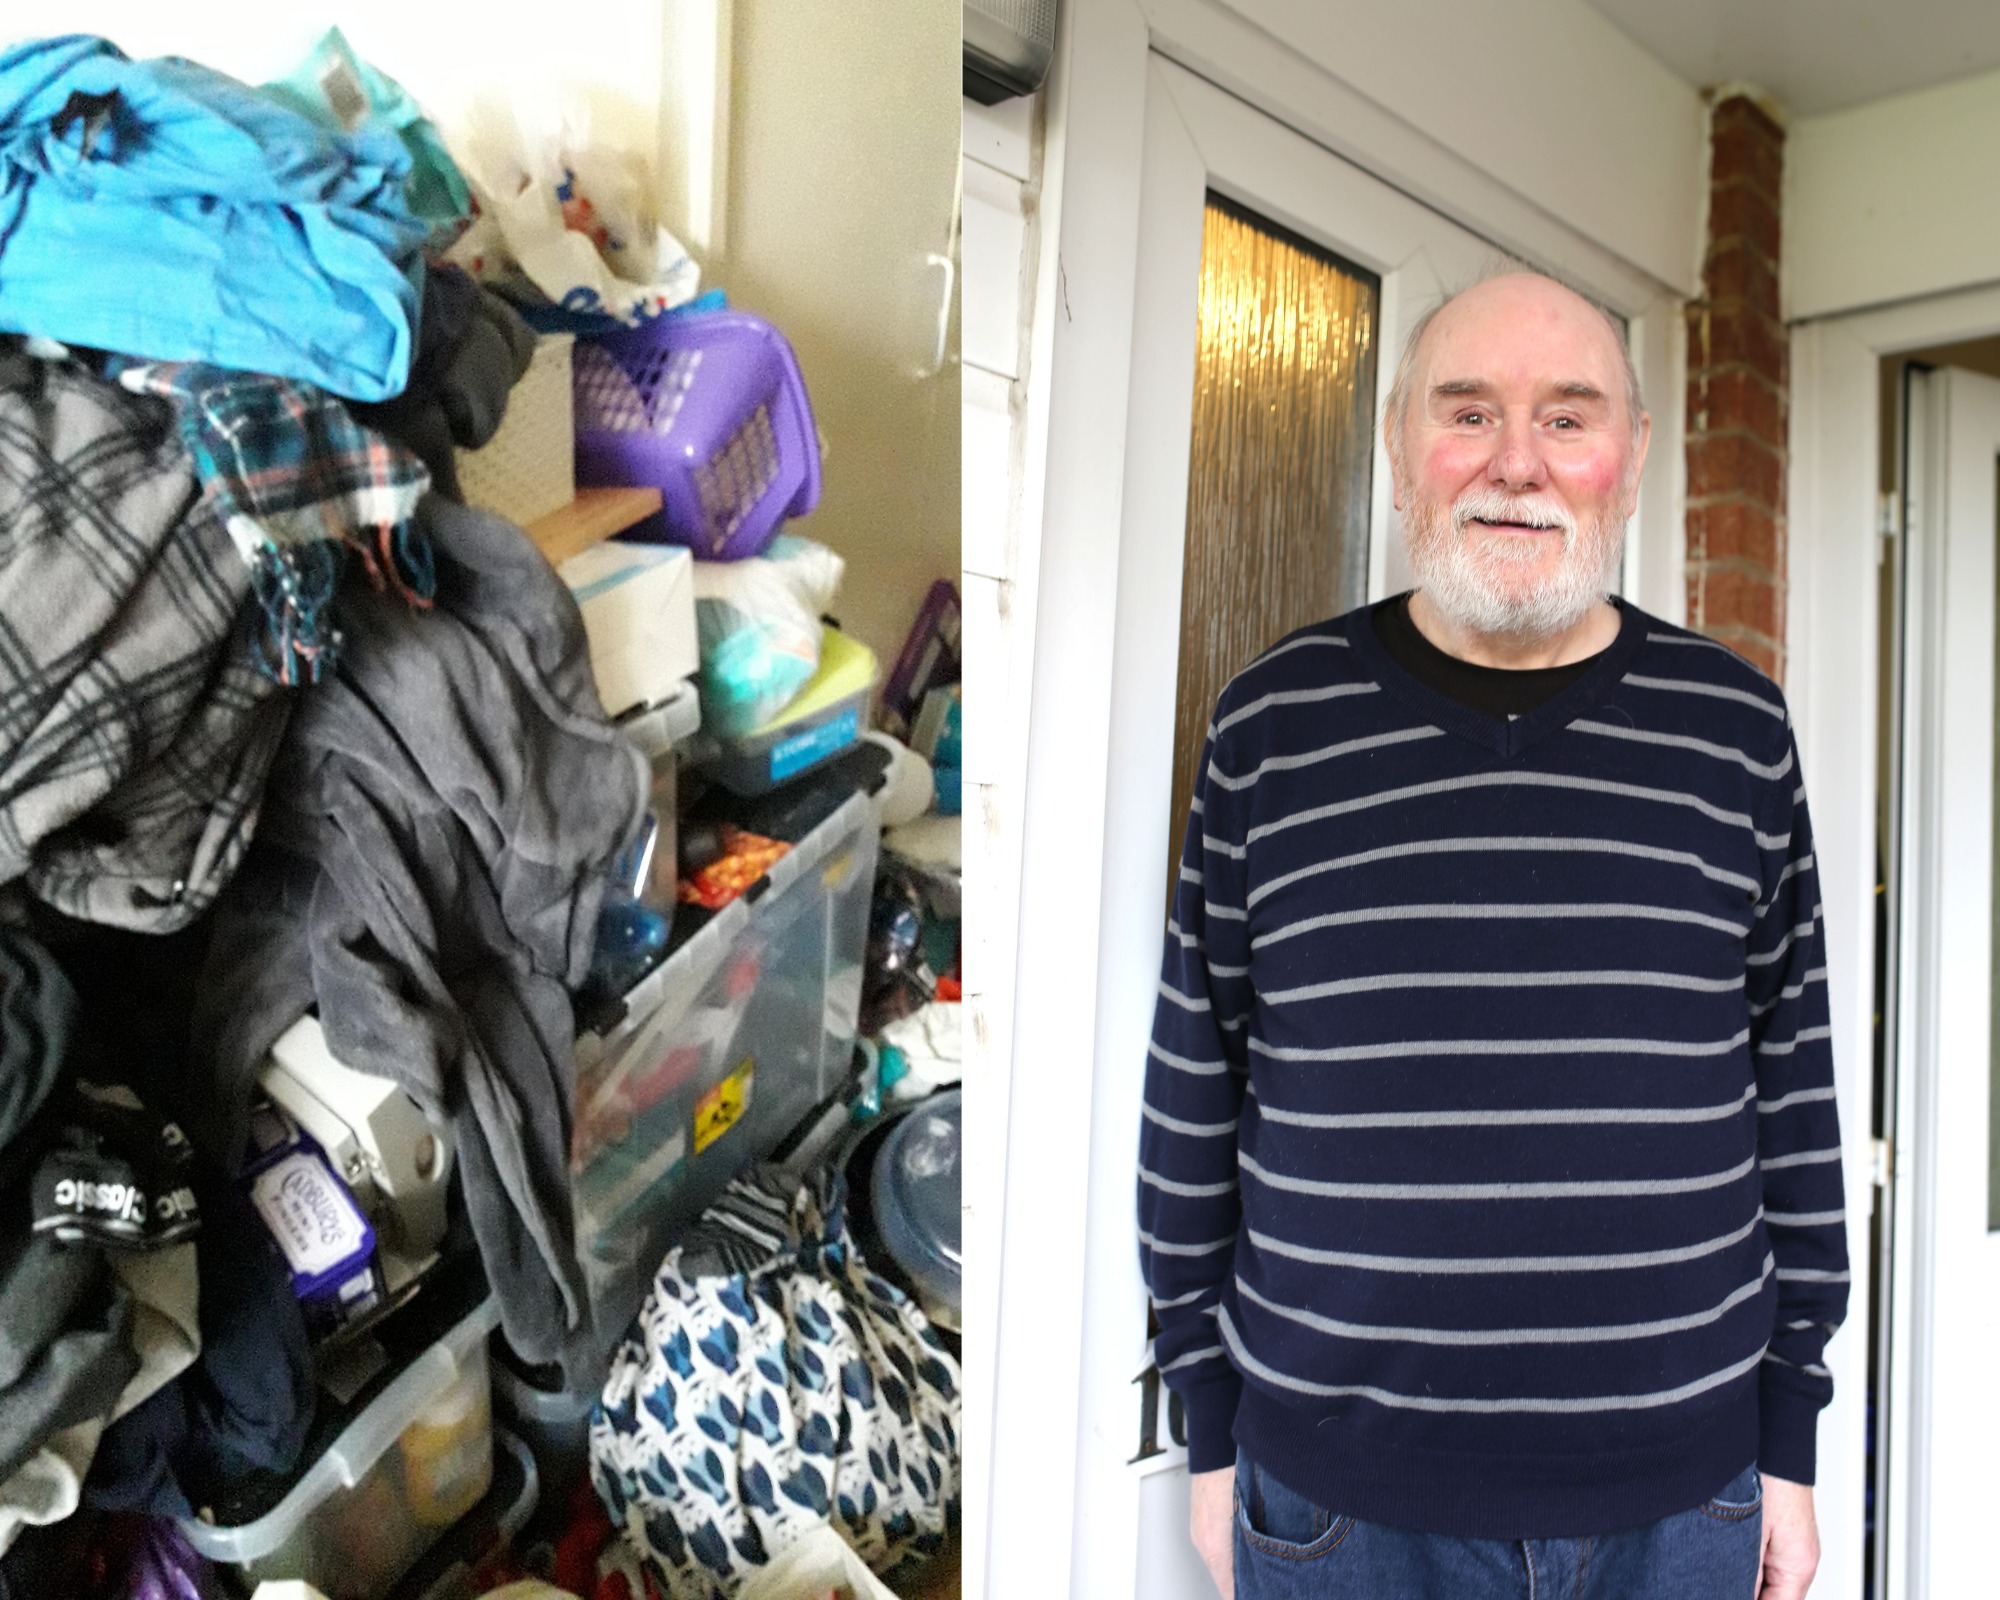 Success for Accrington hoarder who sought help from others